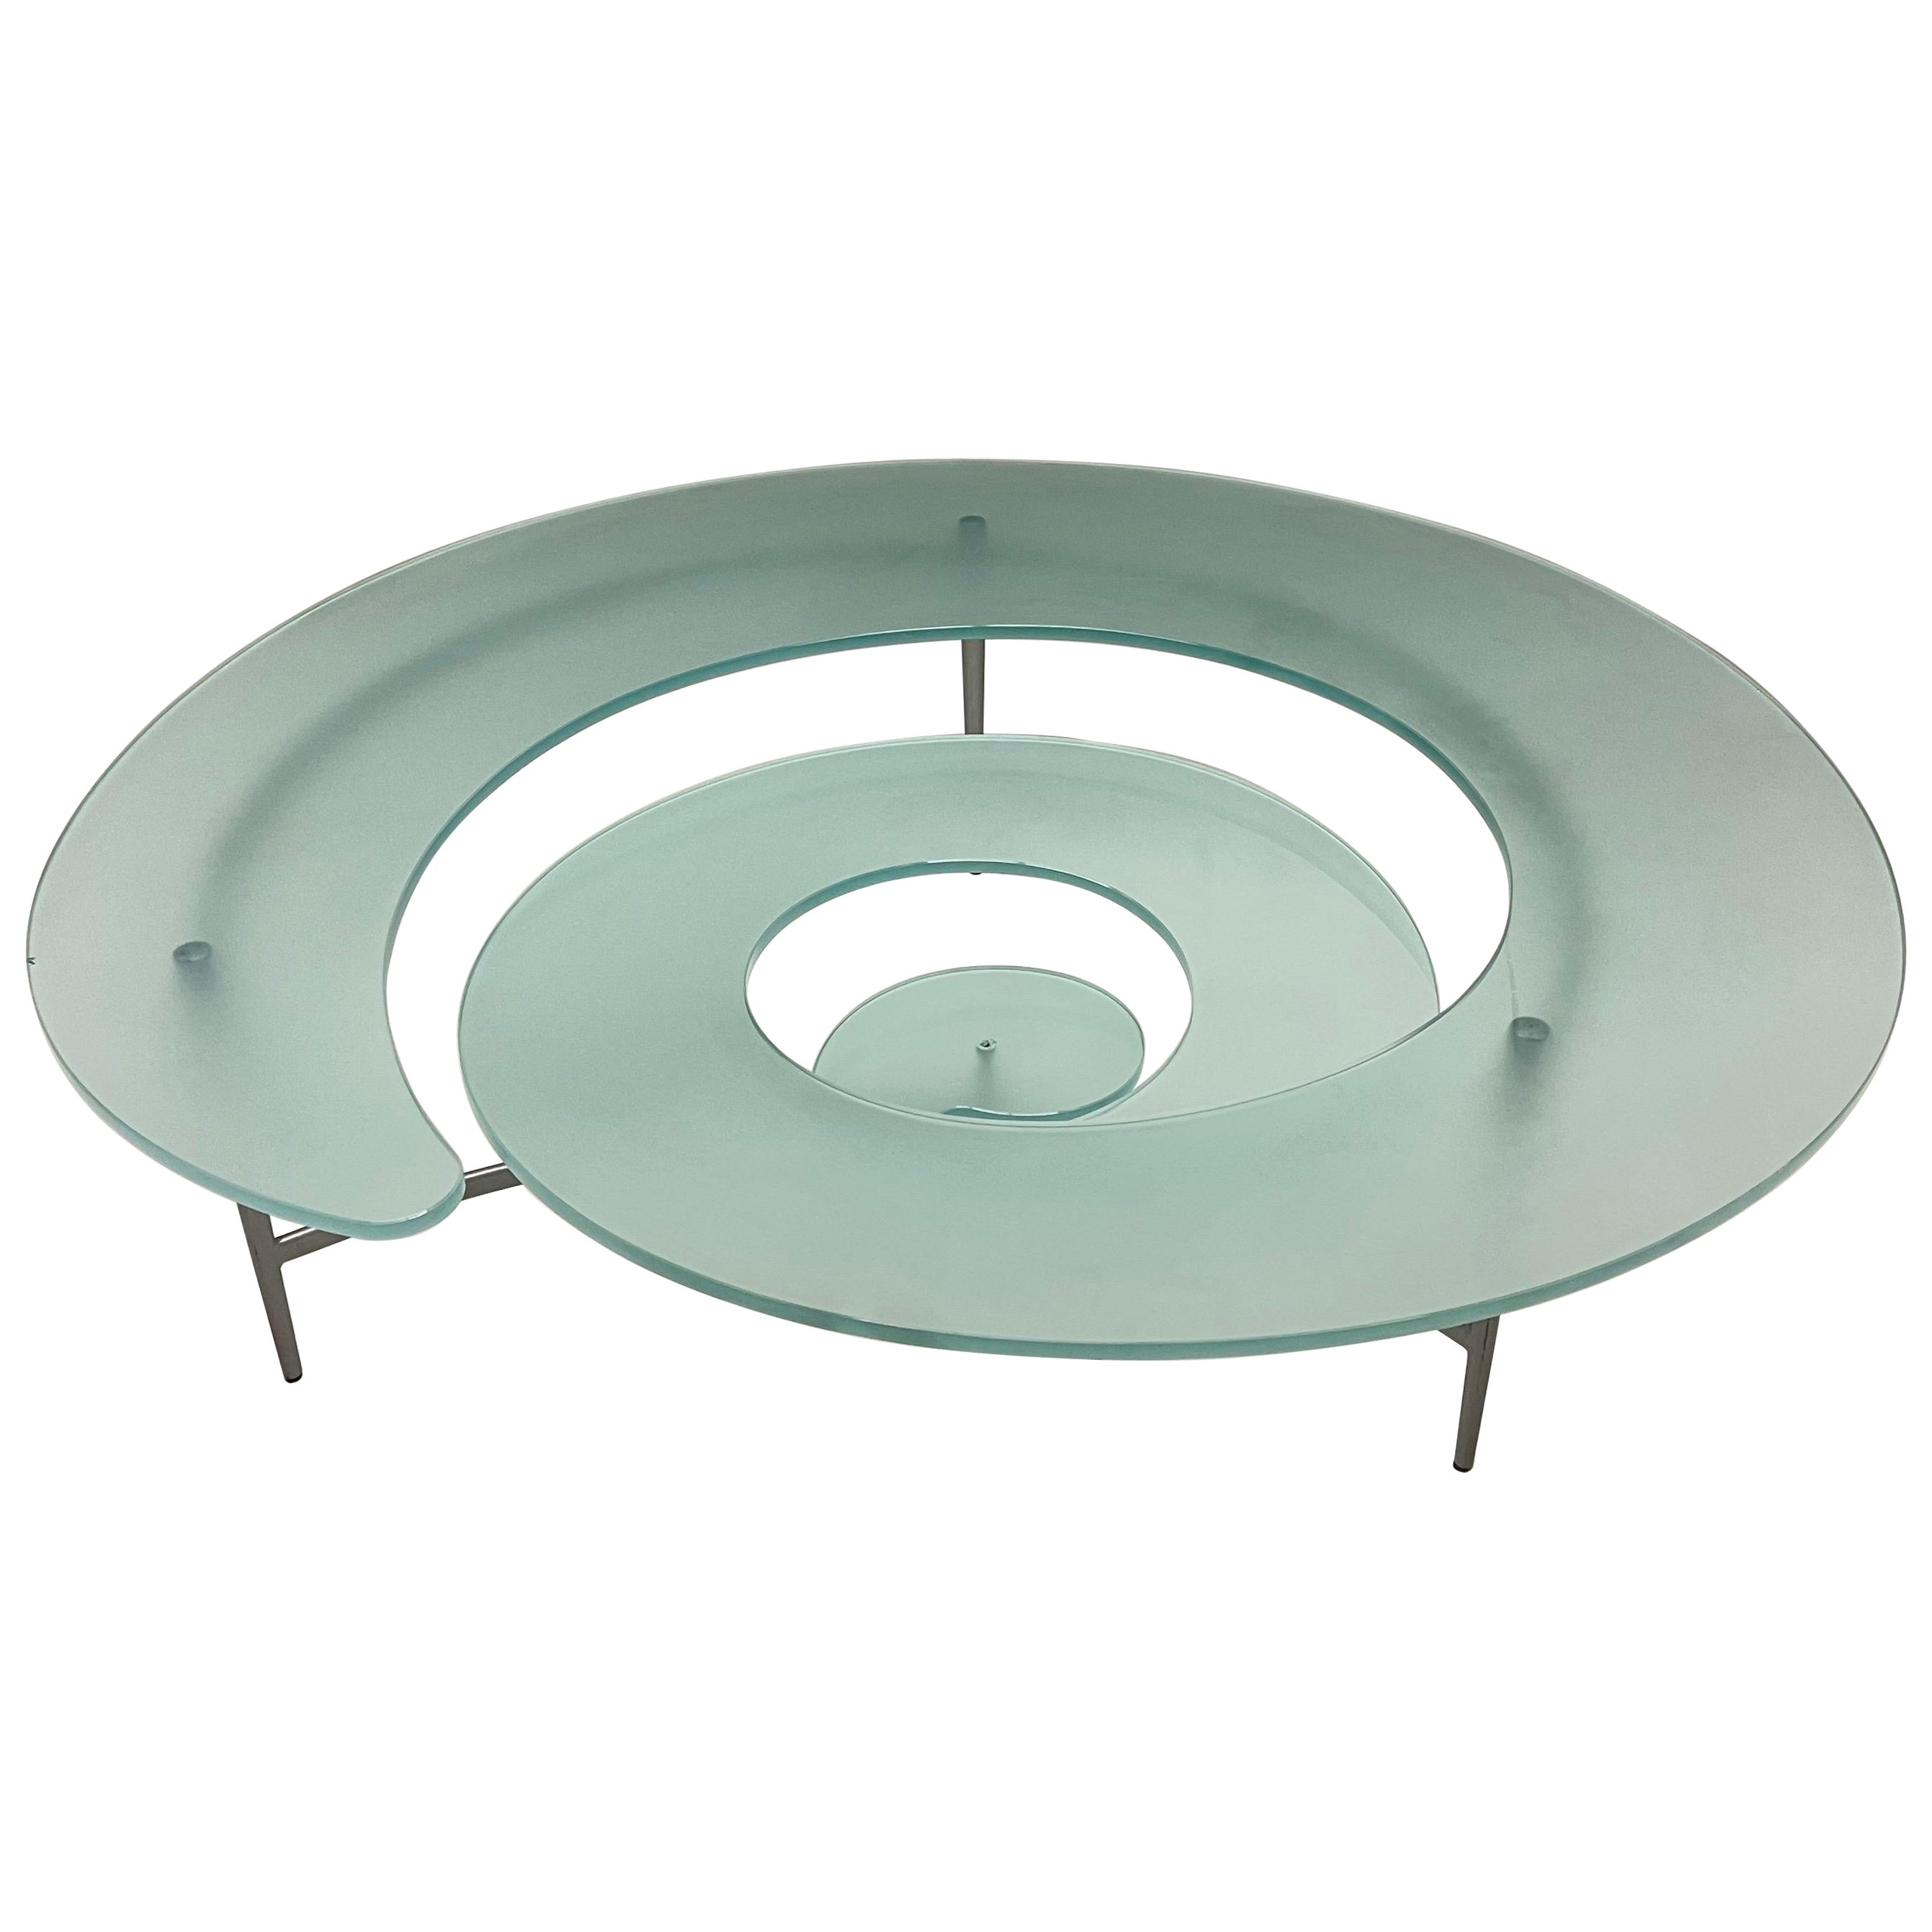 Post Modern Nautilus "Spiral" Glass Coffee or Cocktail Table by Cattelan Itali